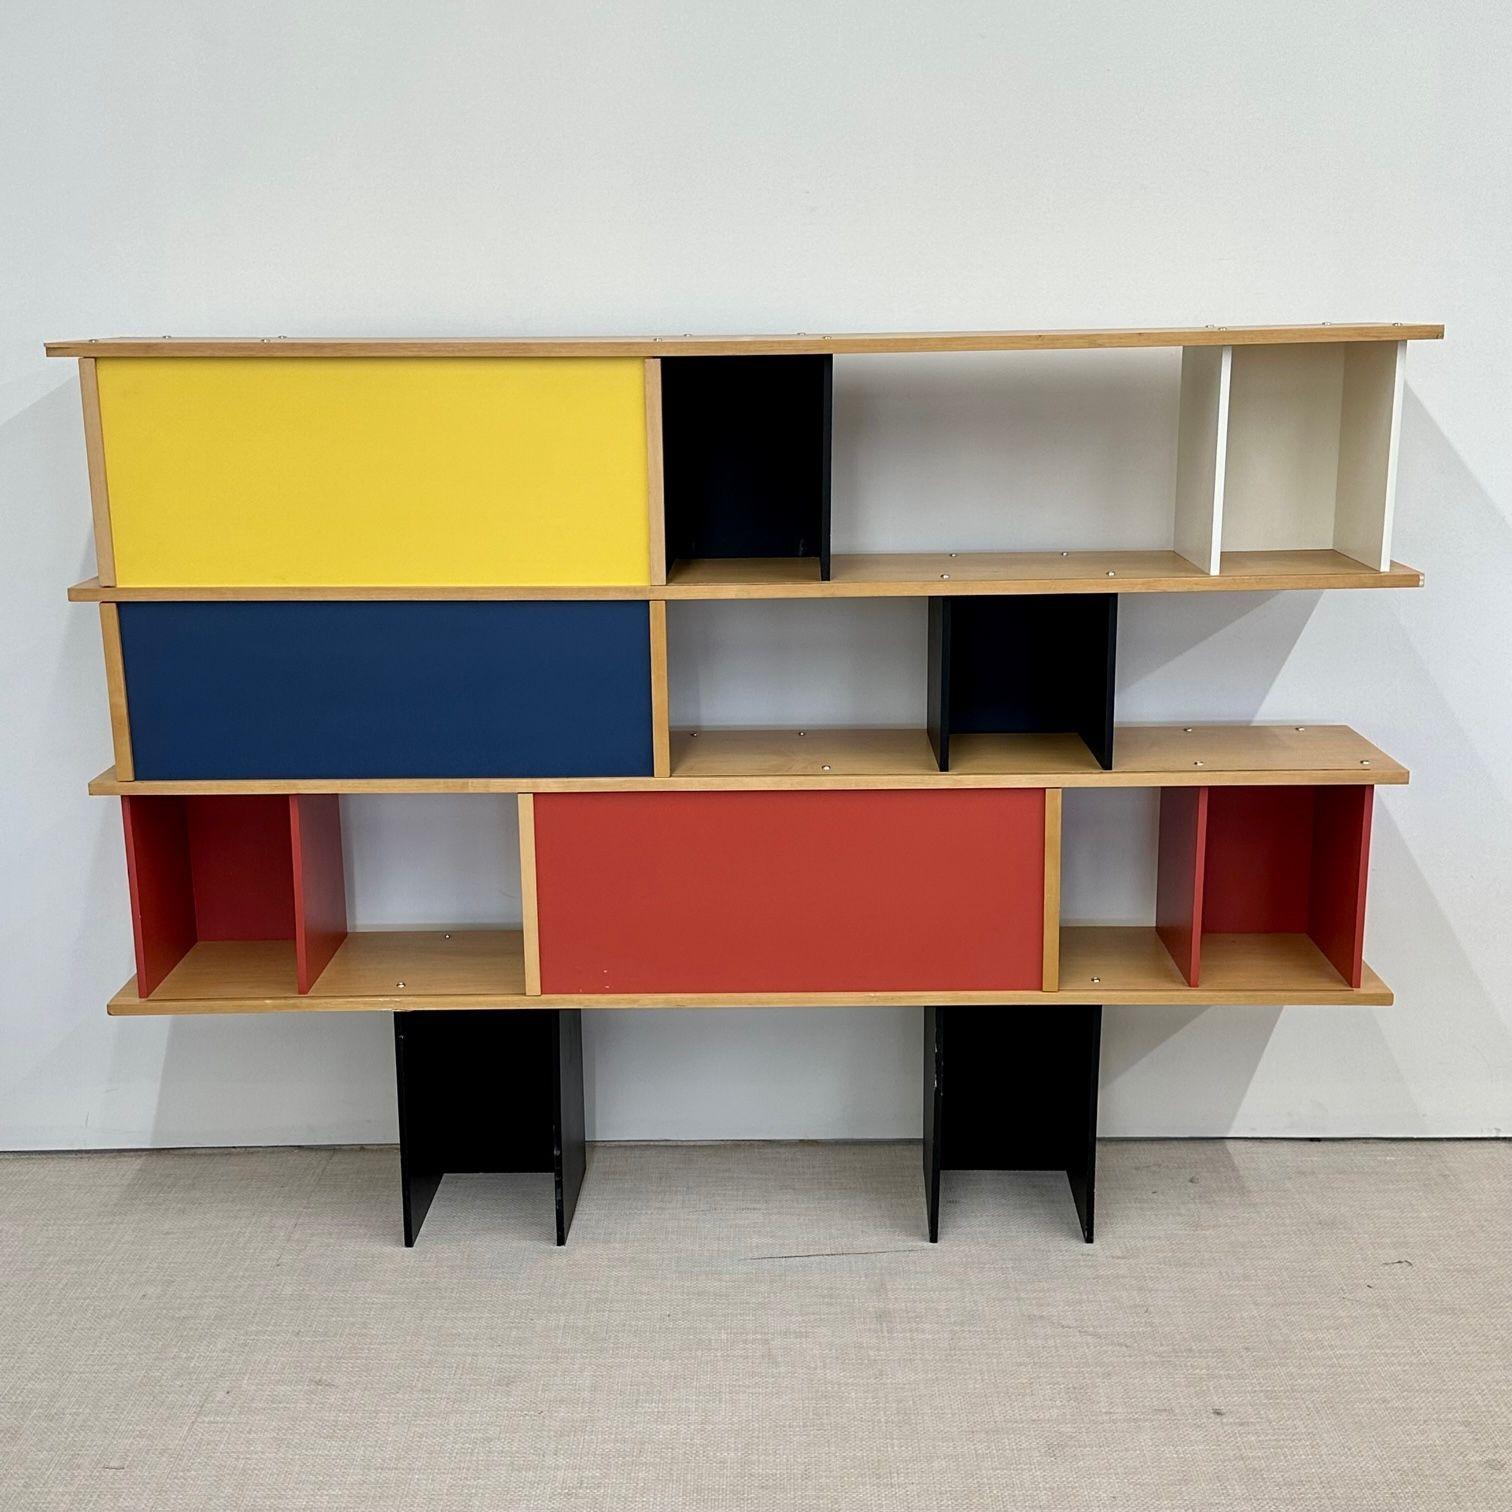 Mid-Century Modern style shelving unit, bookcase, Manner Perriand, room divider.
 
Colorful modern shelving unit, bookcase, or room divider having modular storage spaces with two sliding doors. This unit can both stand on the floor or be mounted